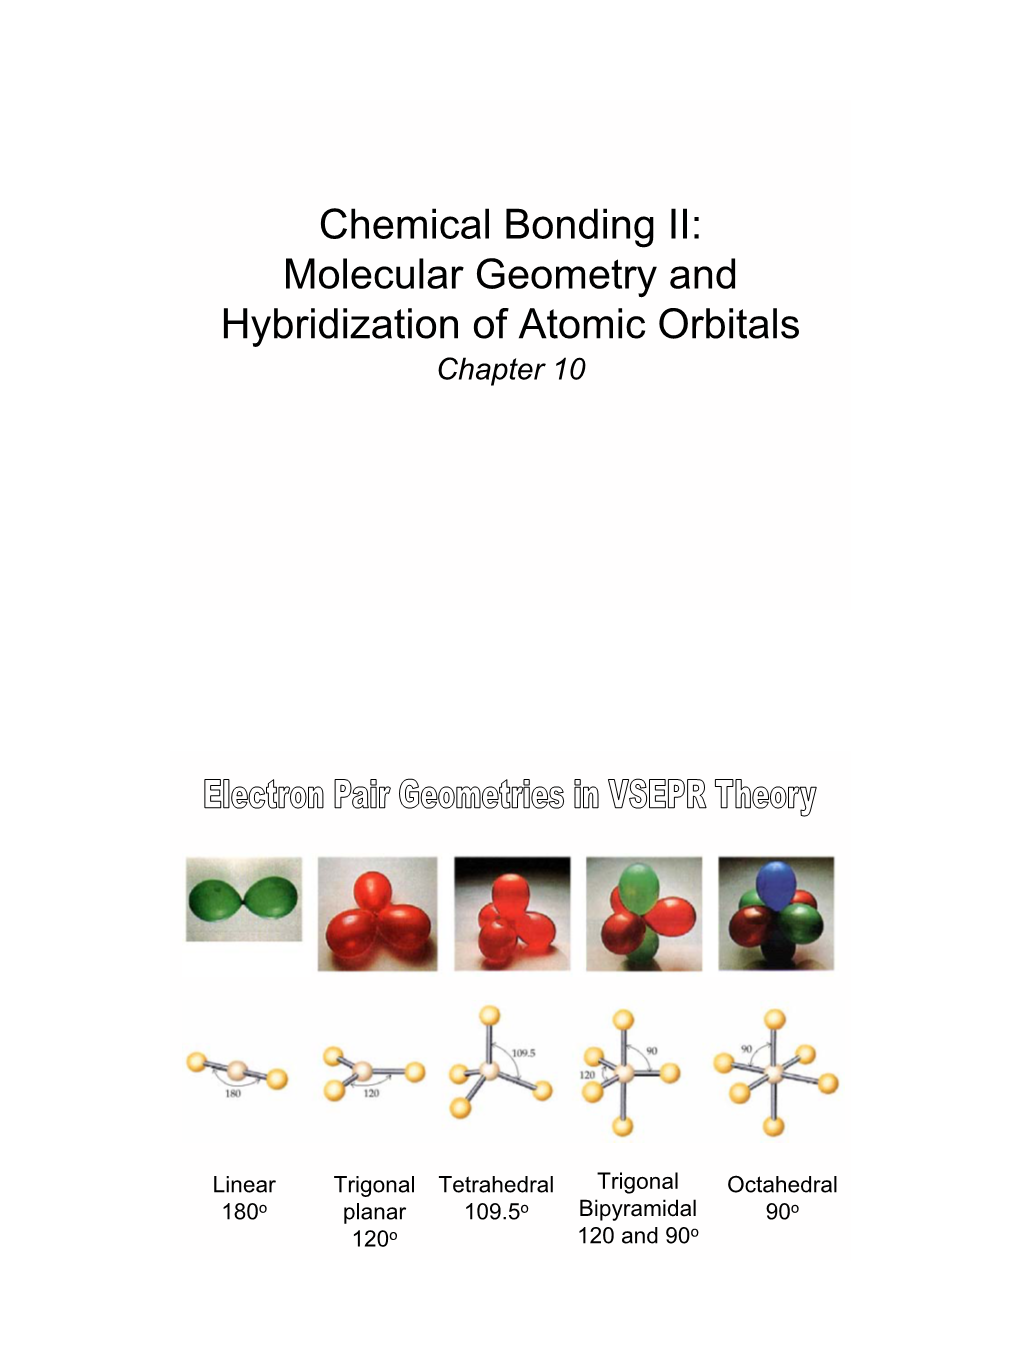 Chemical Bonding II: Molecular Geometry and Hybridization of Atomic Orbitals Chapter 10